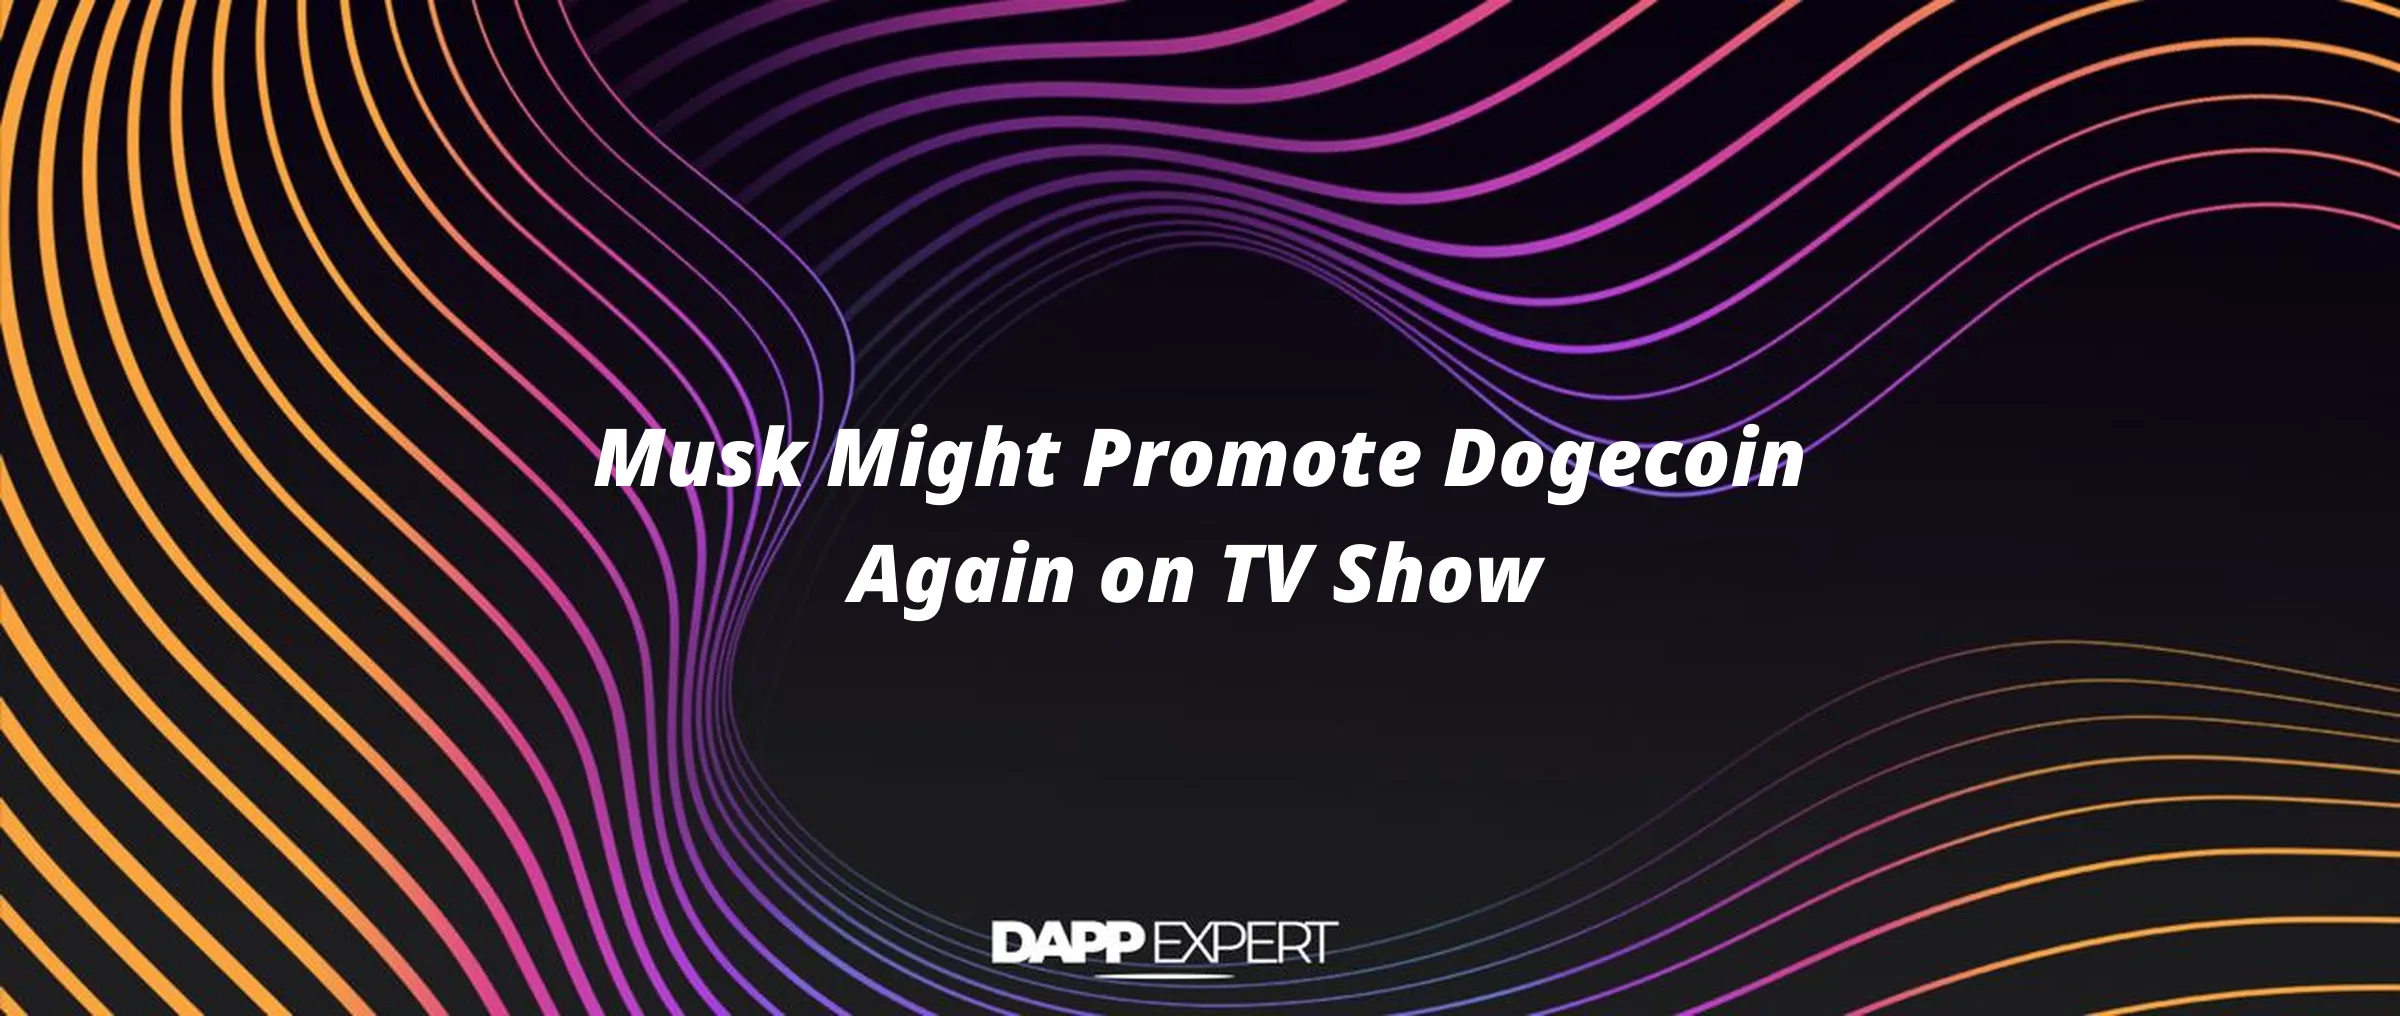 Musk Might Promote Dogecoin Again on TV Show